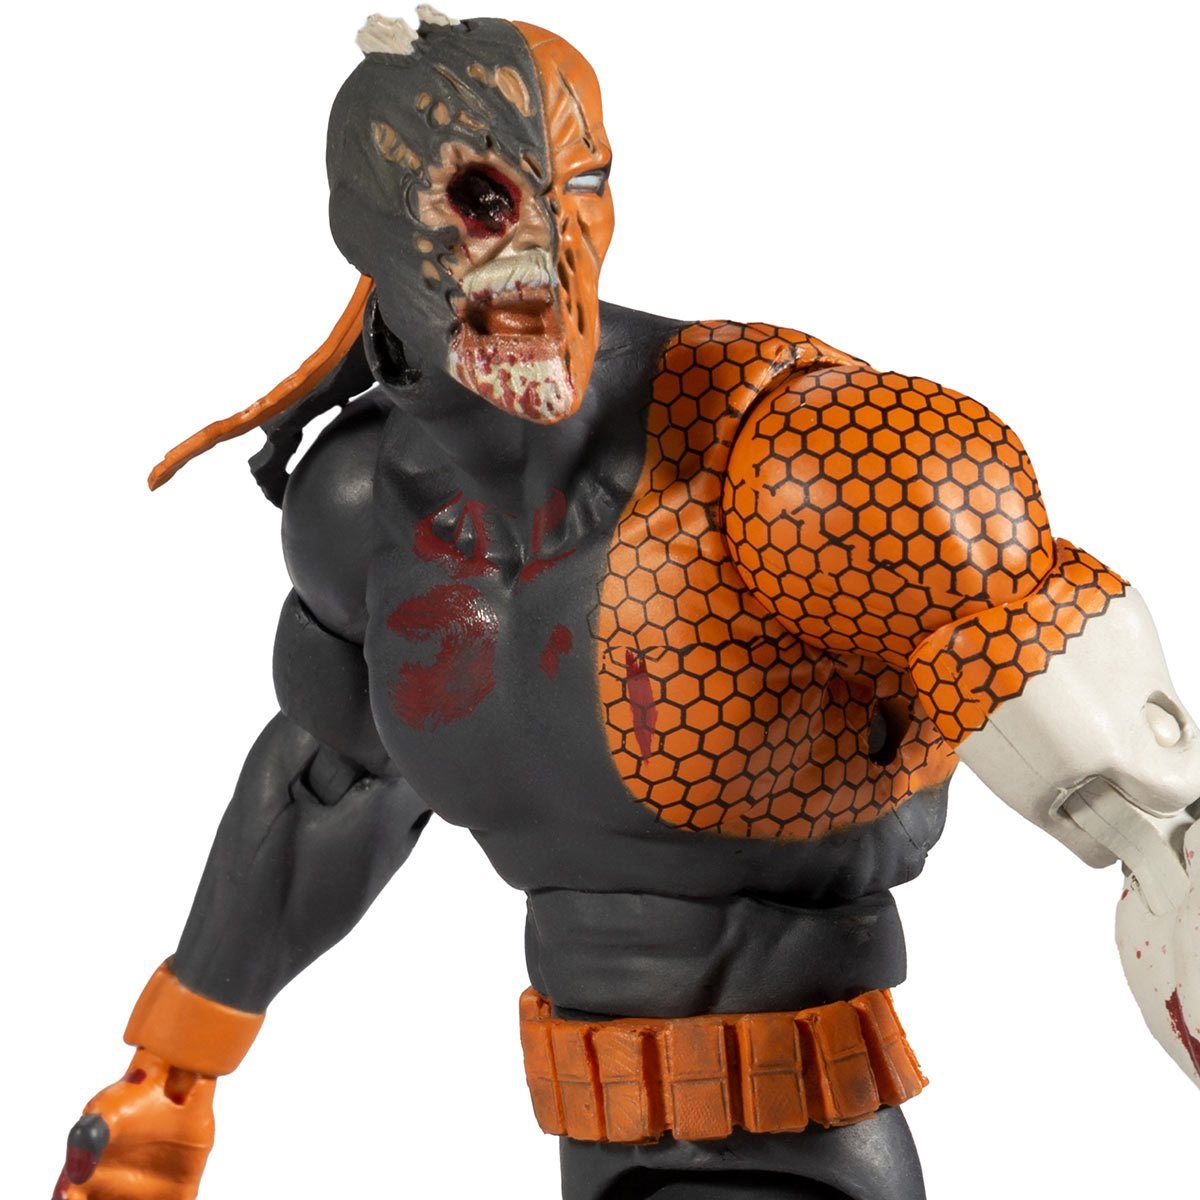 New DC Essentials DCeased Figures Available For Pre-Order